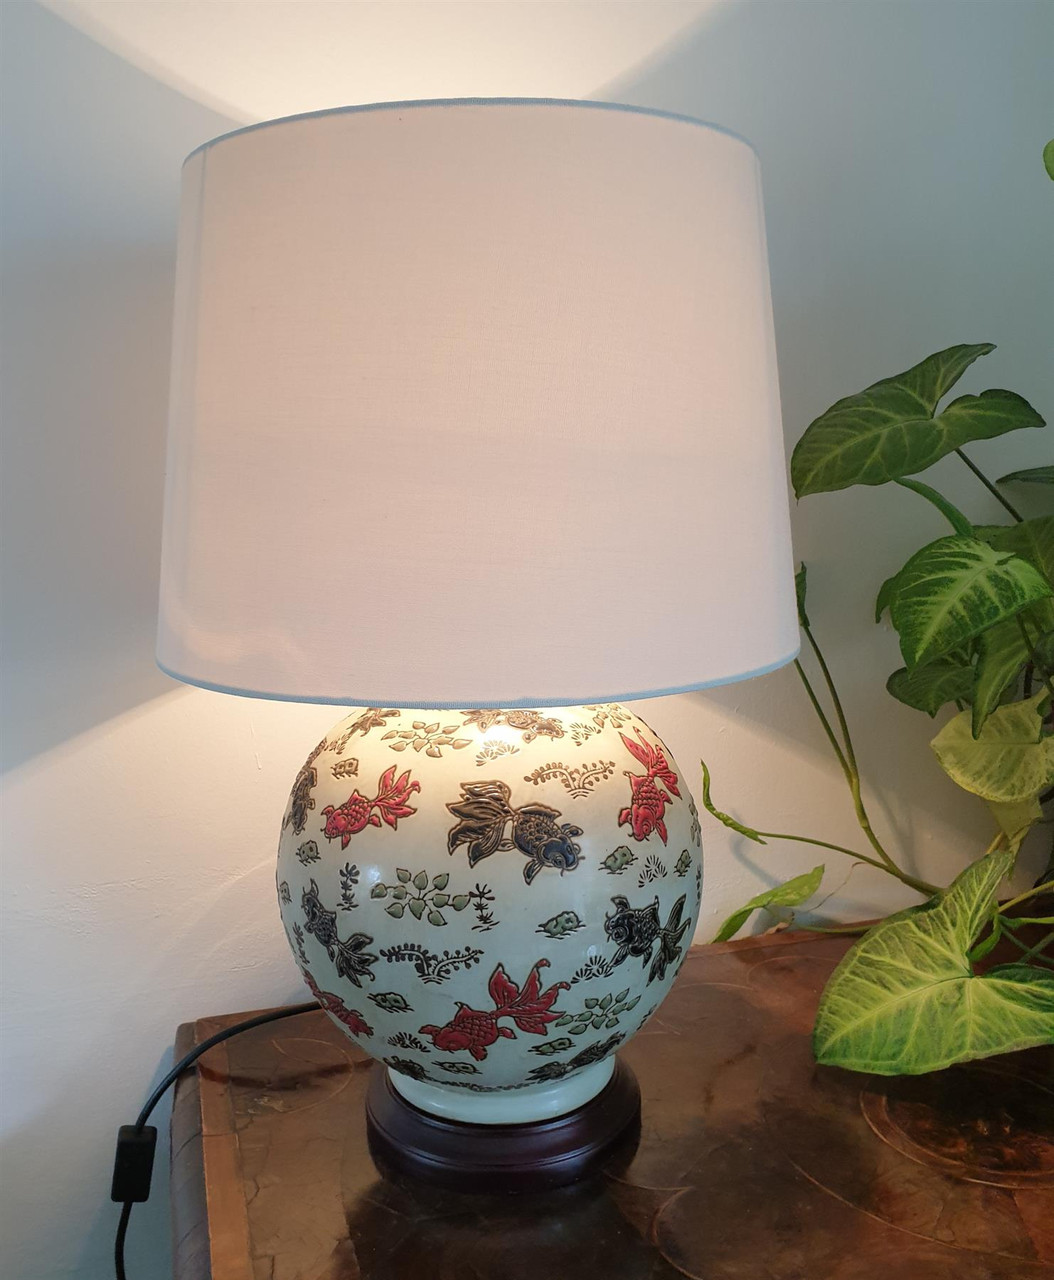 Pair of Chinese Round Bottle Lamps with Shades - Goldfish Pattern - 55cm